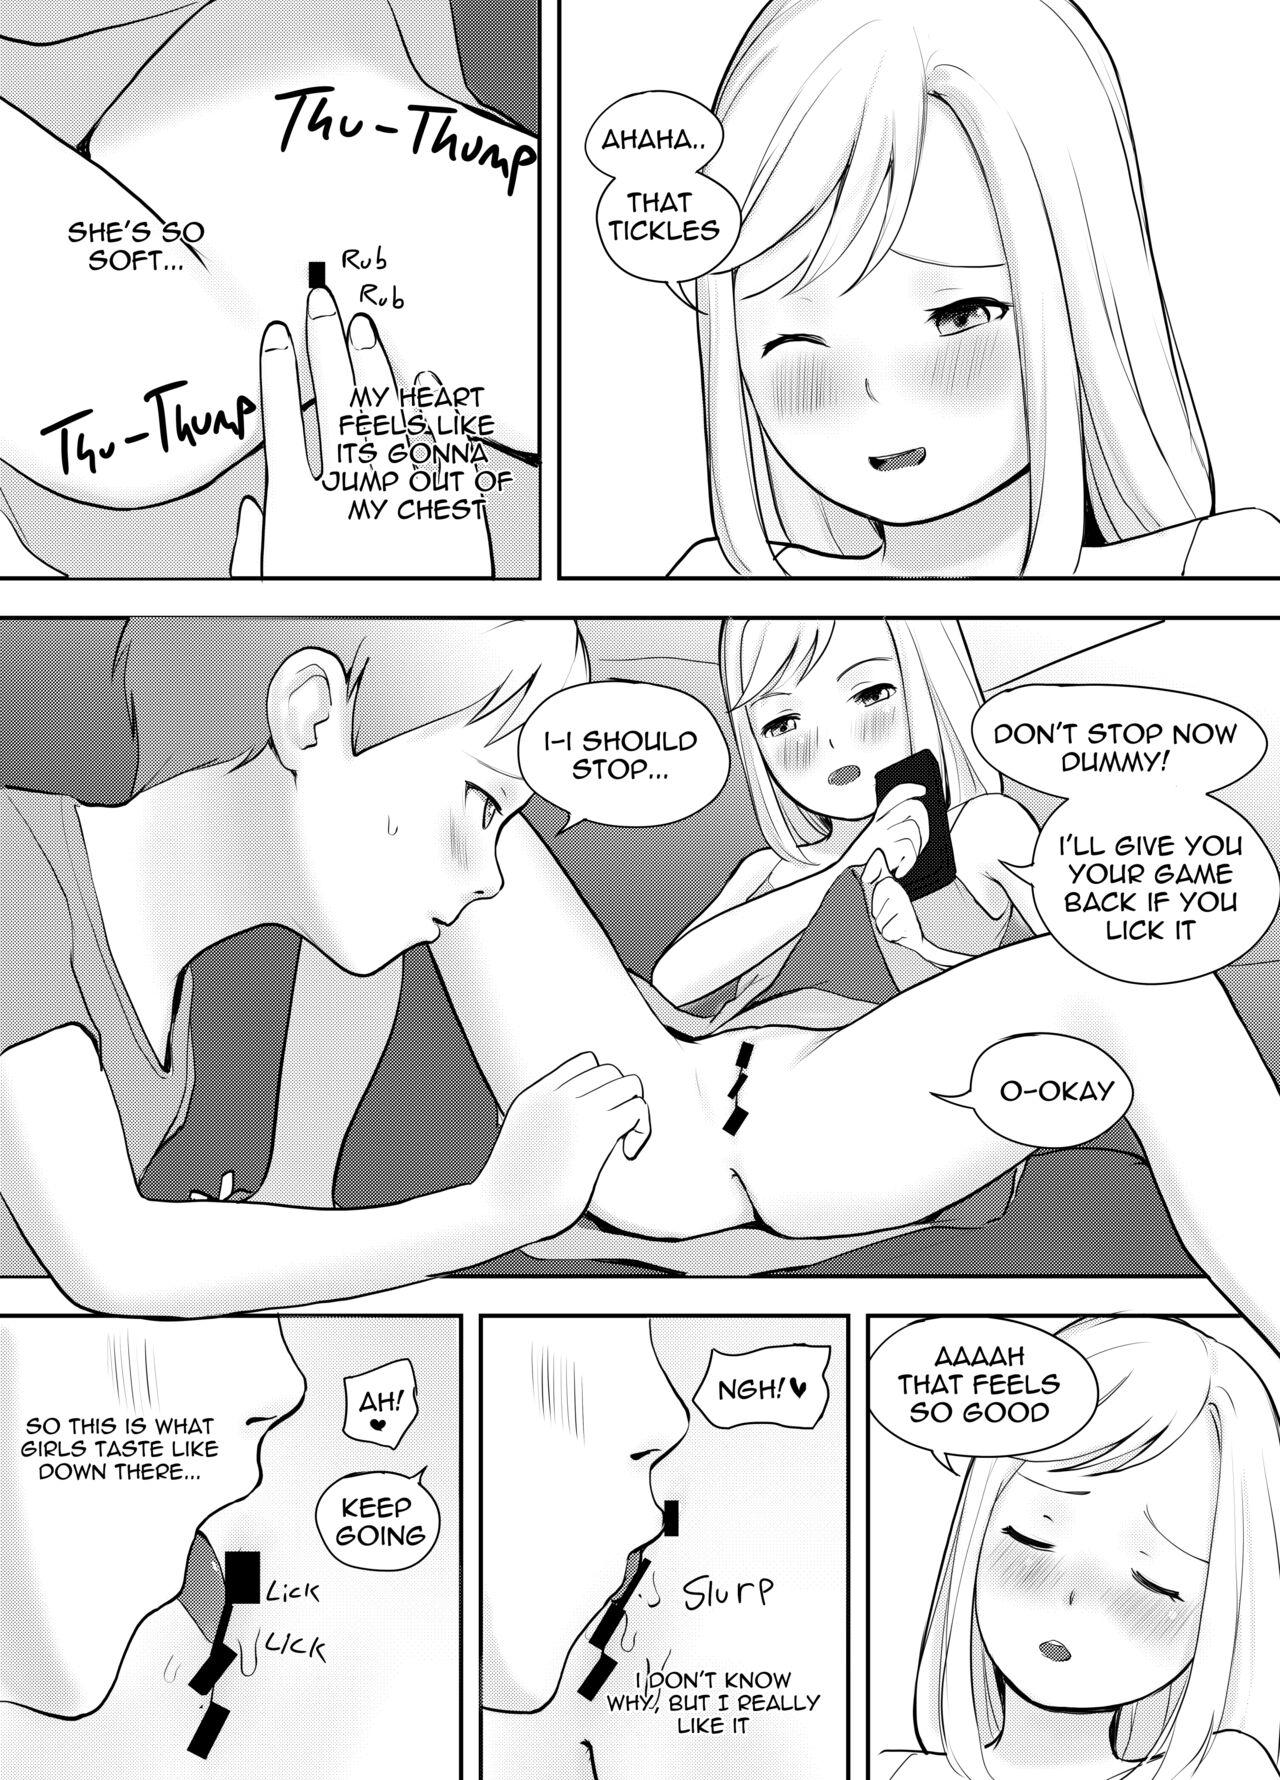 Blowjob Passing the Time - Original Fucking - Page 6